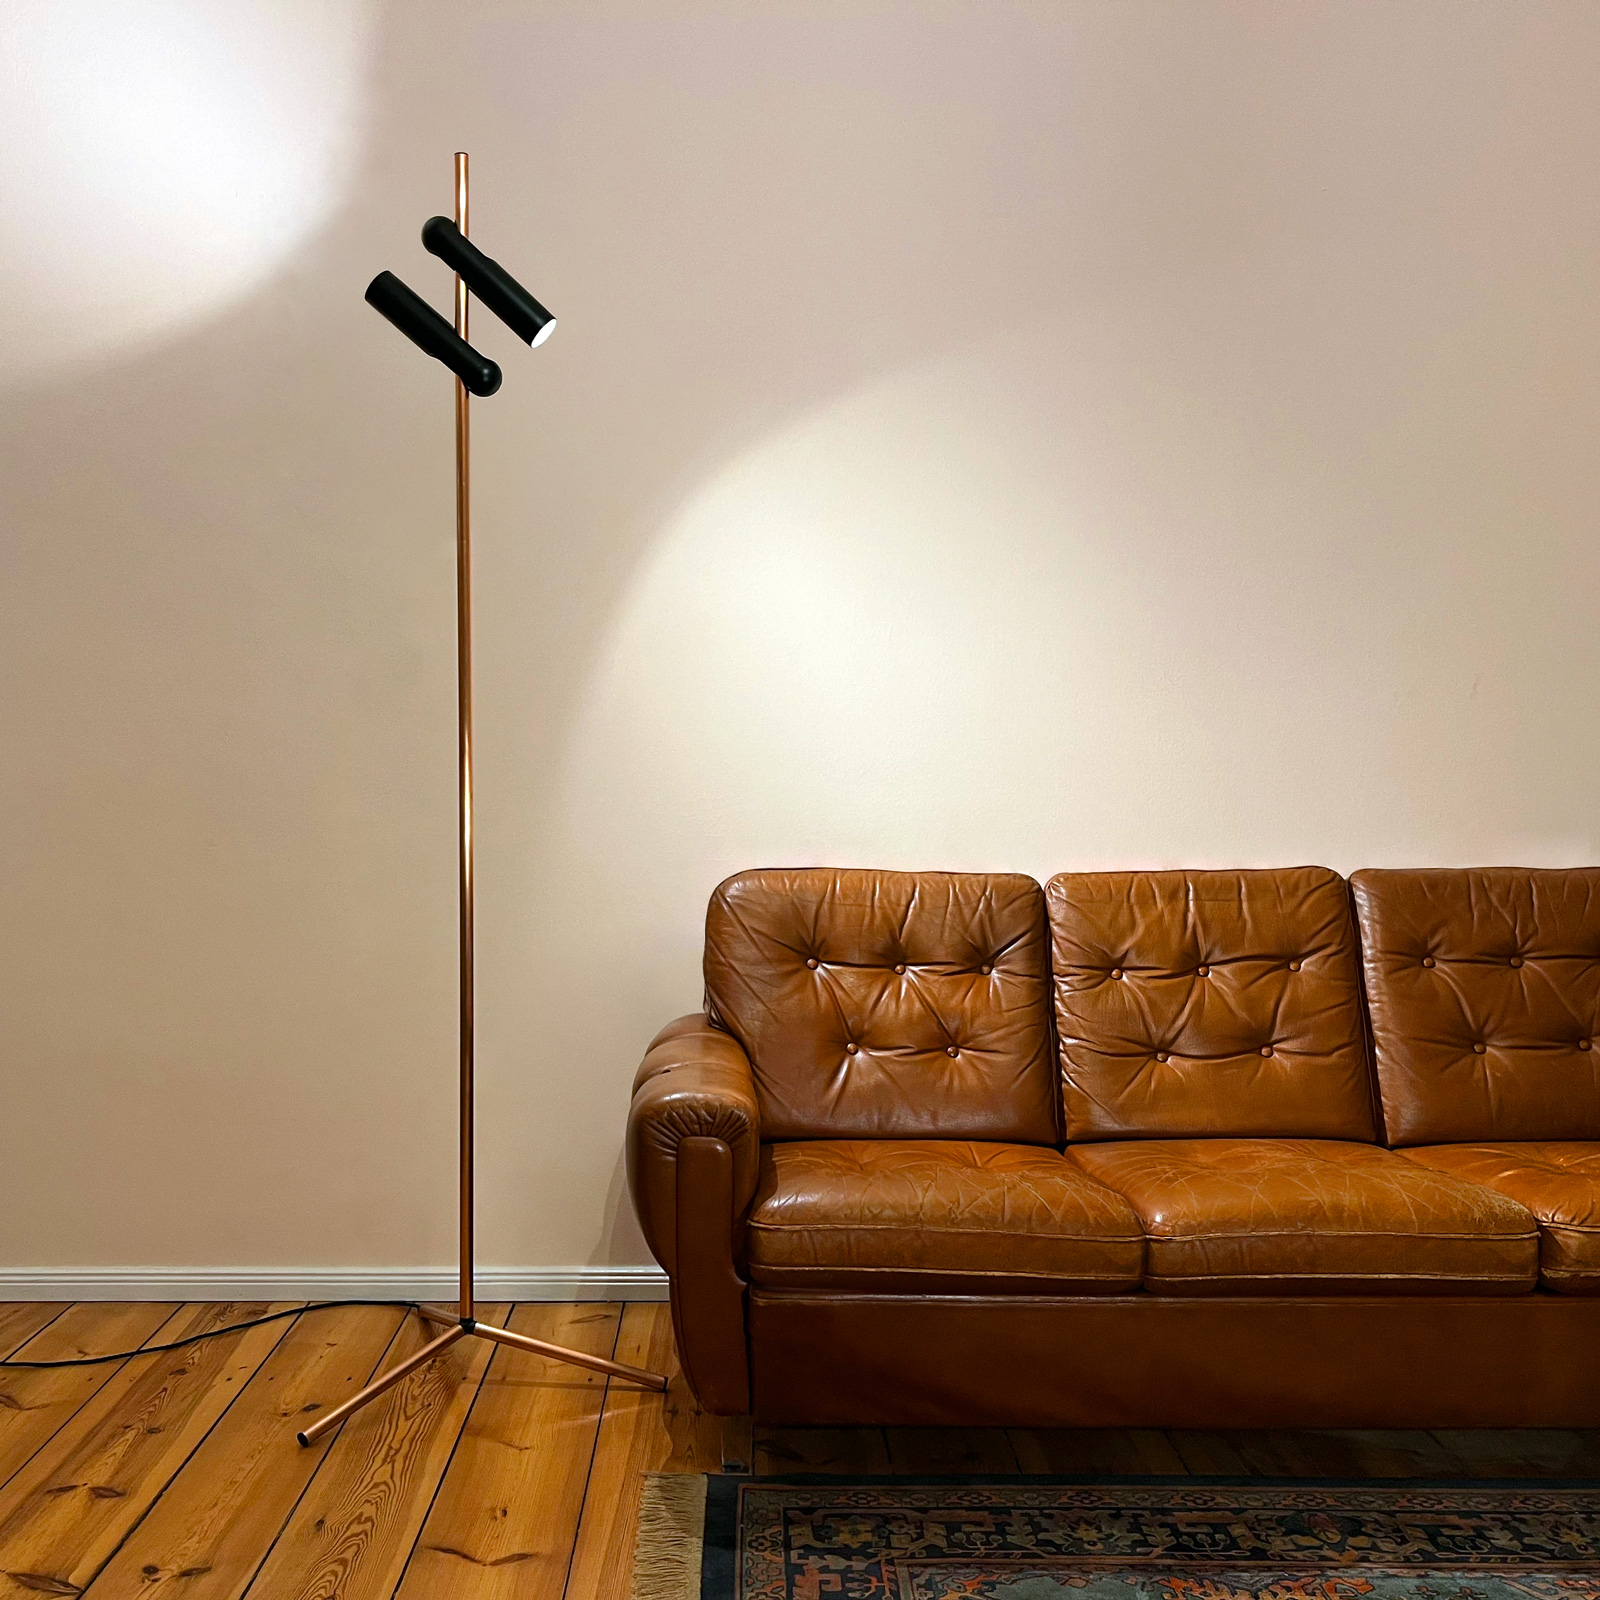 Photograph of the Tower light in a lounge room, next to a brown leather couch and colorful rug.